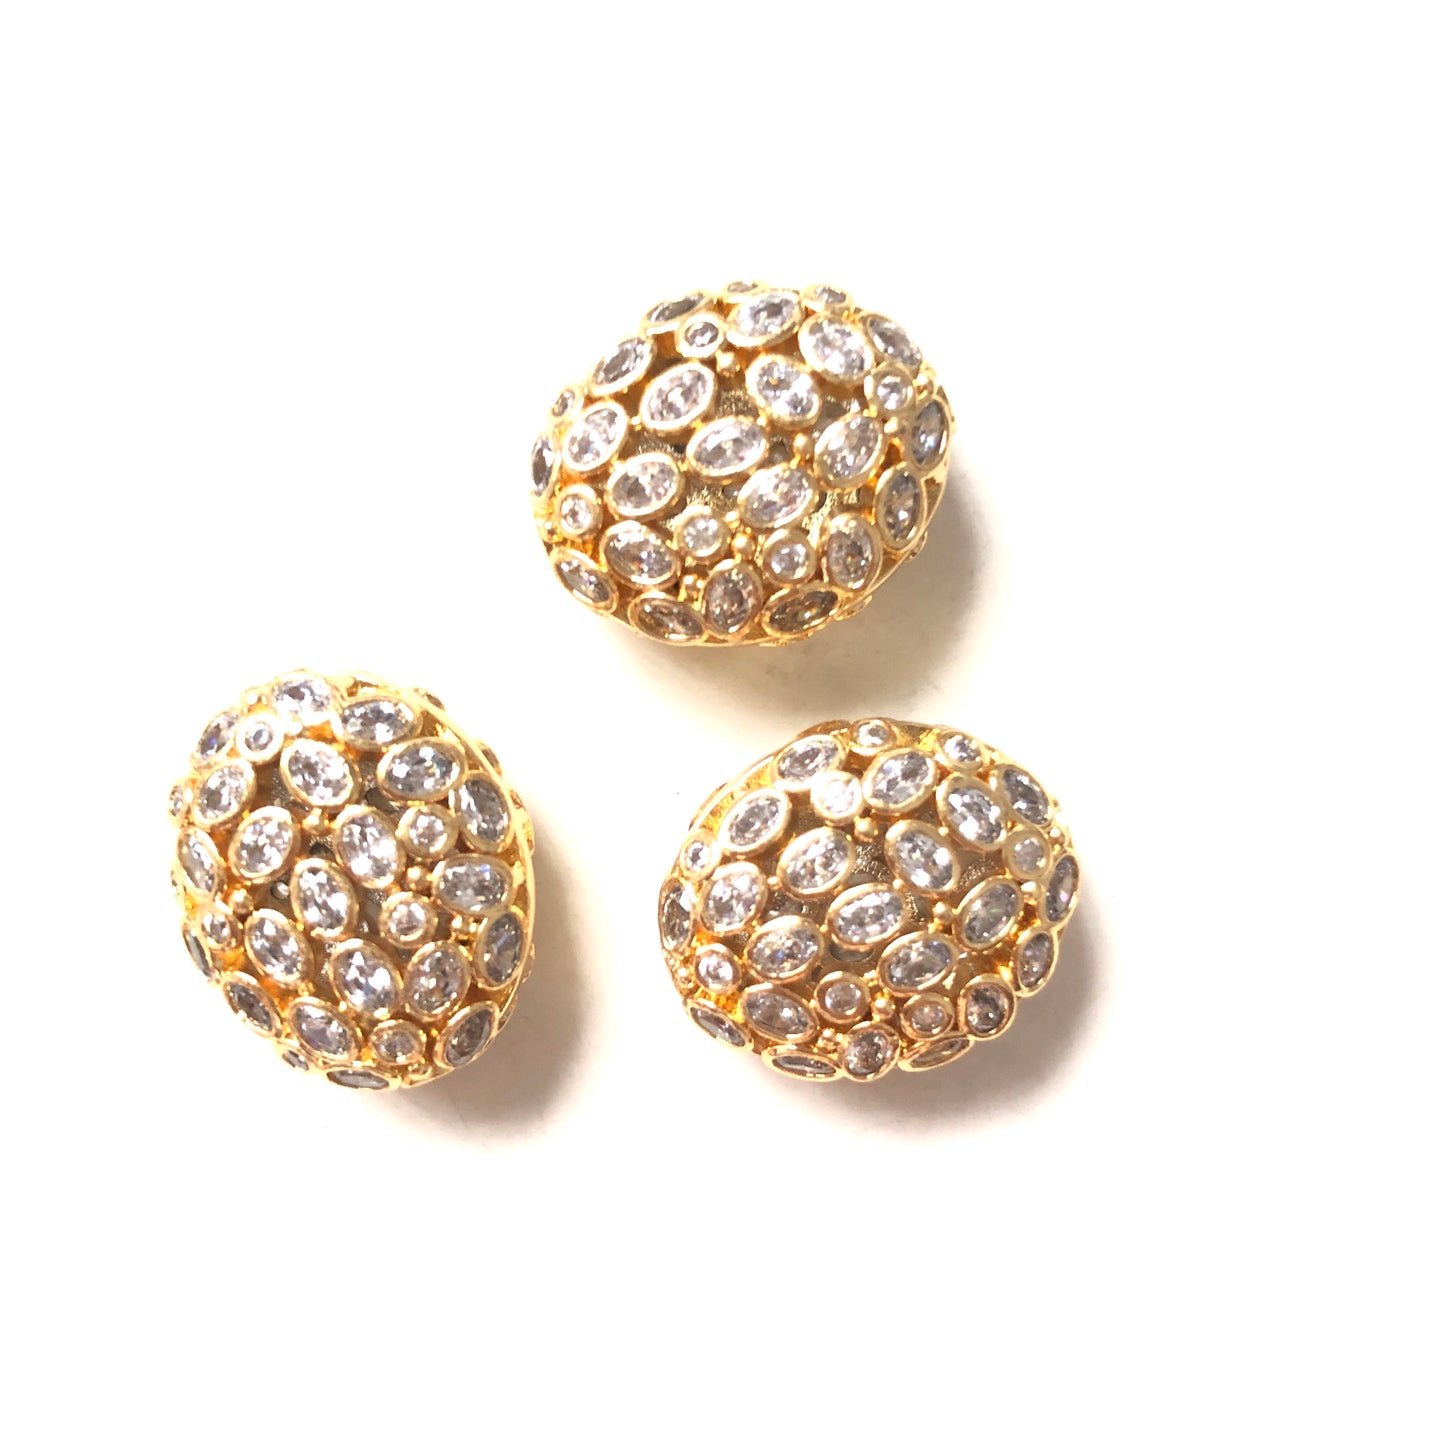 5-10pcs/lot 19*16mm Small Size Hollow Flat Oval CZ Egg Beads Spacers Gold CZ Paved Spacers Egg Beads Charms Beads Beyond